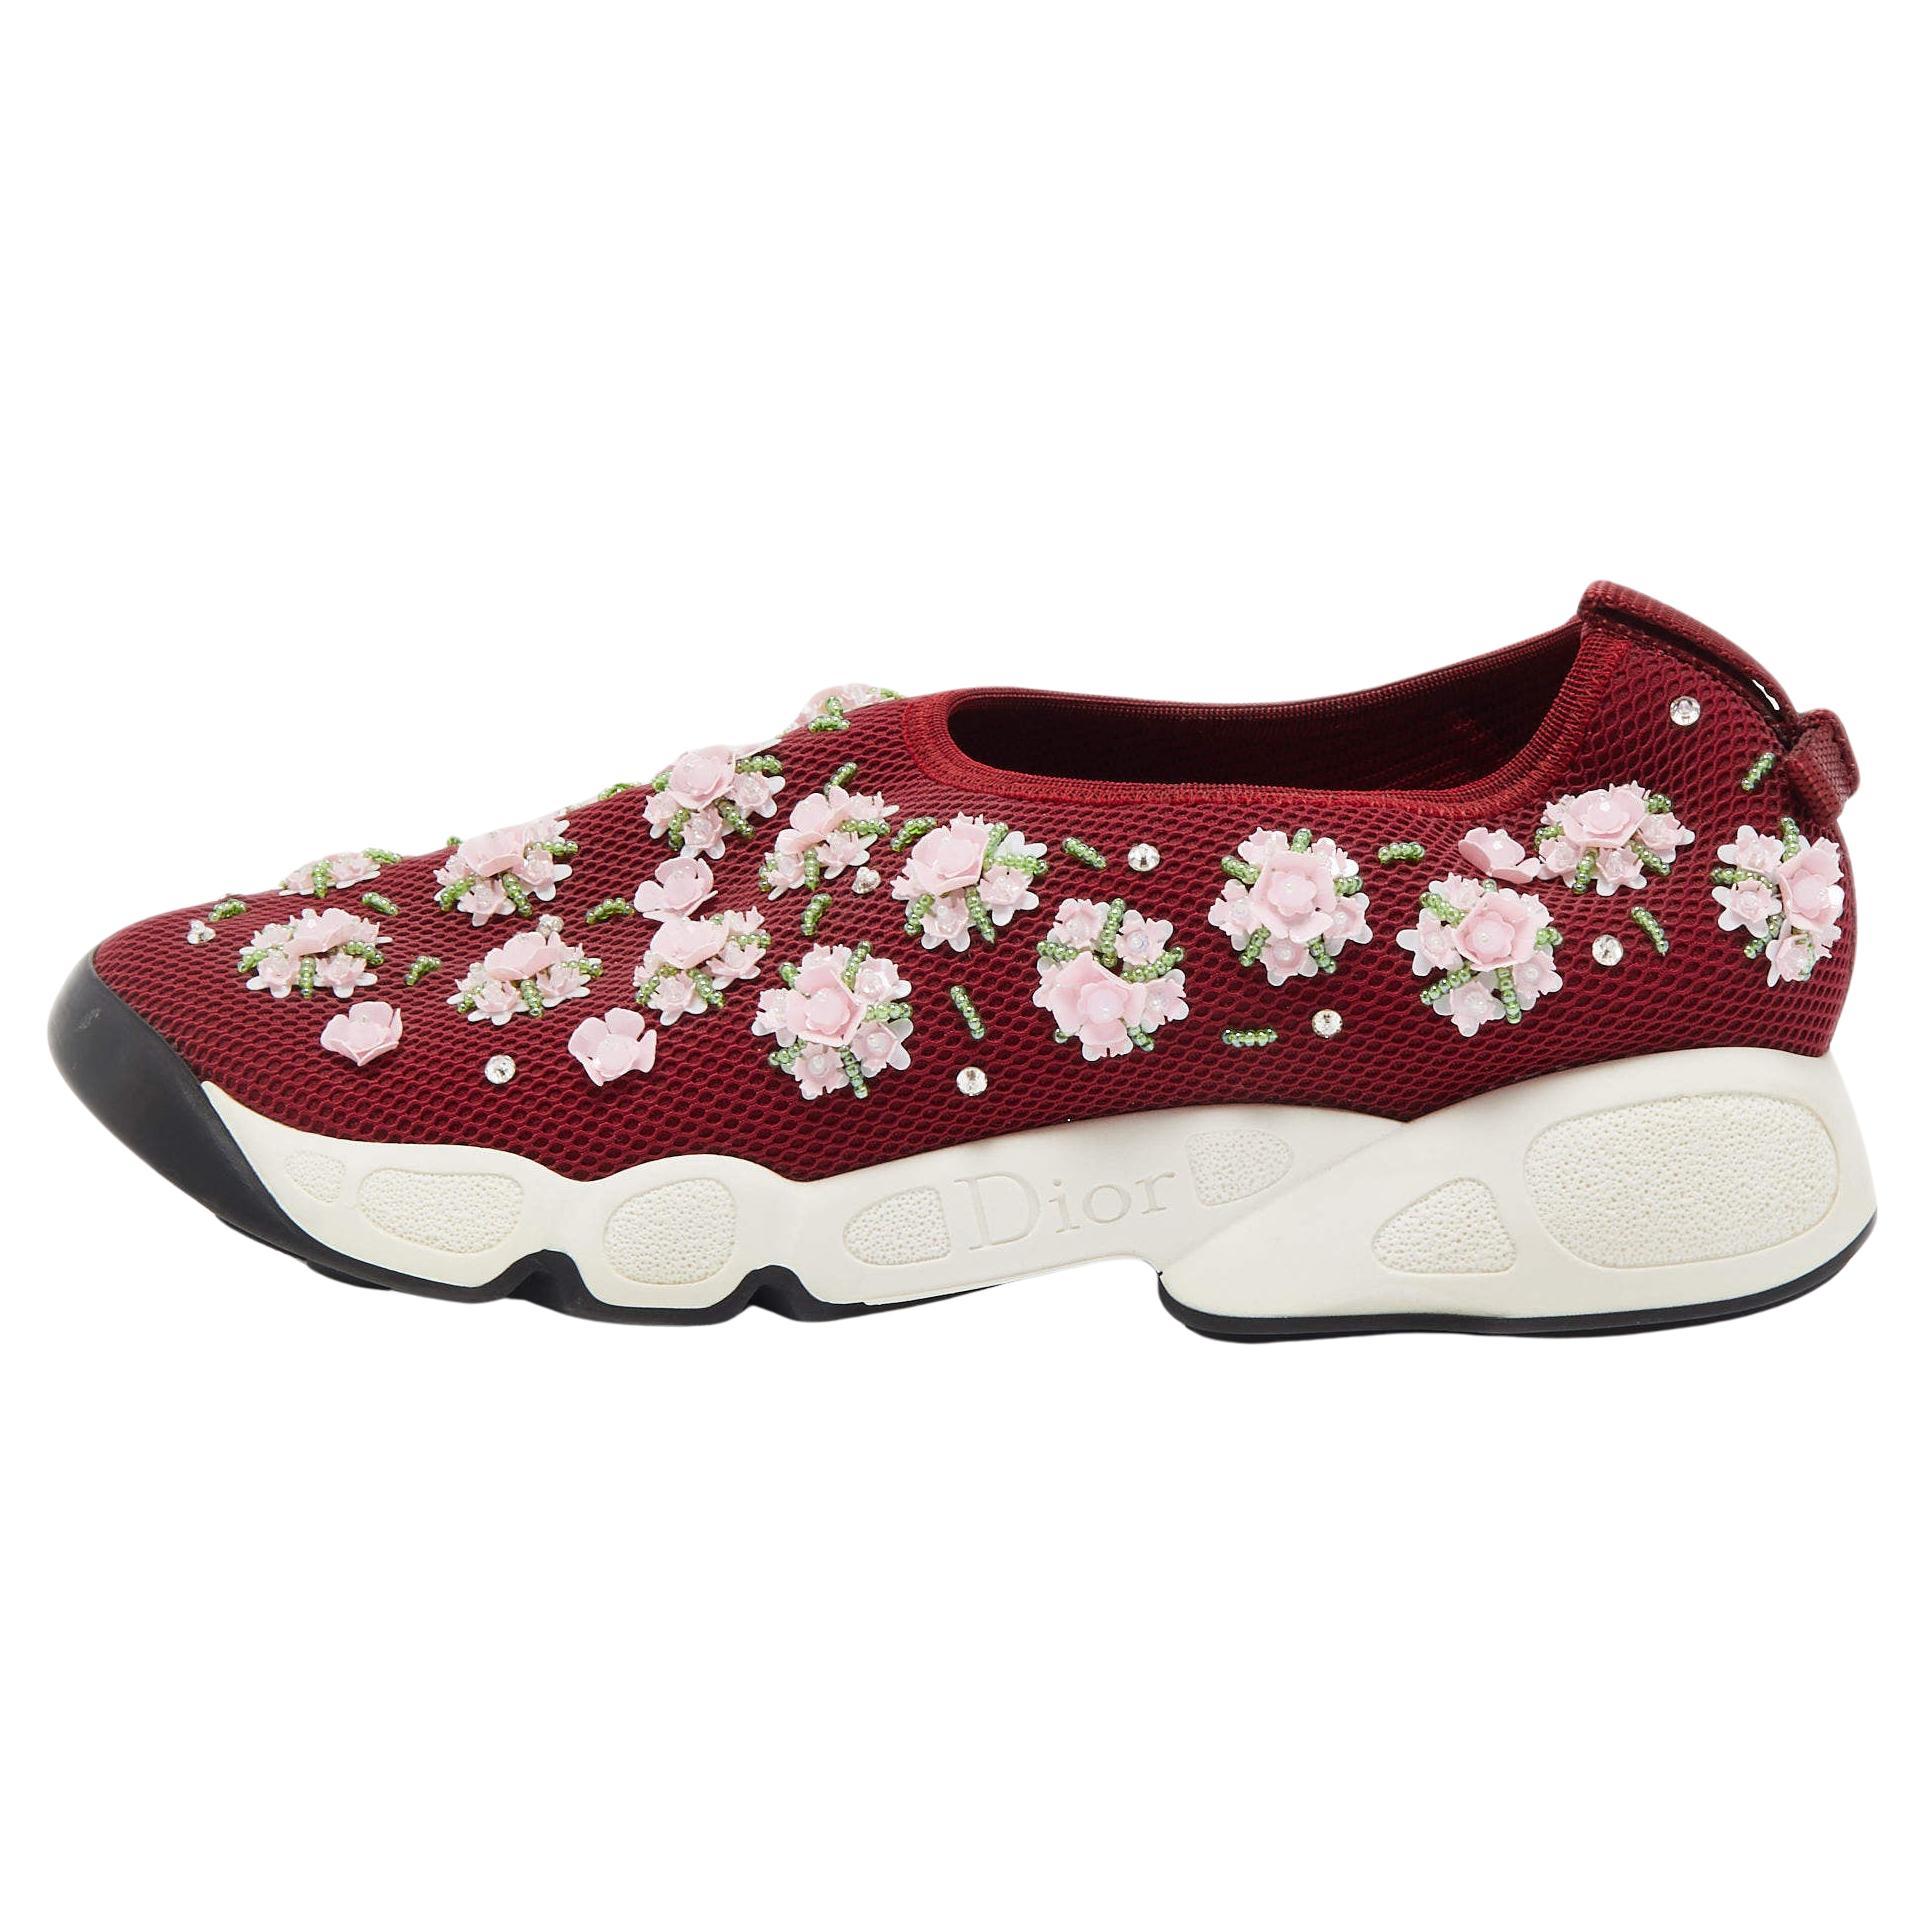 Dior Burgundy Mesh Fusion Slip On Sneakers Size 38 For Sale